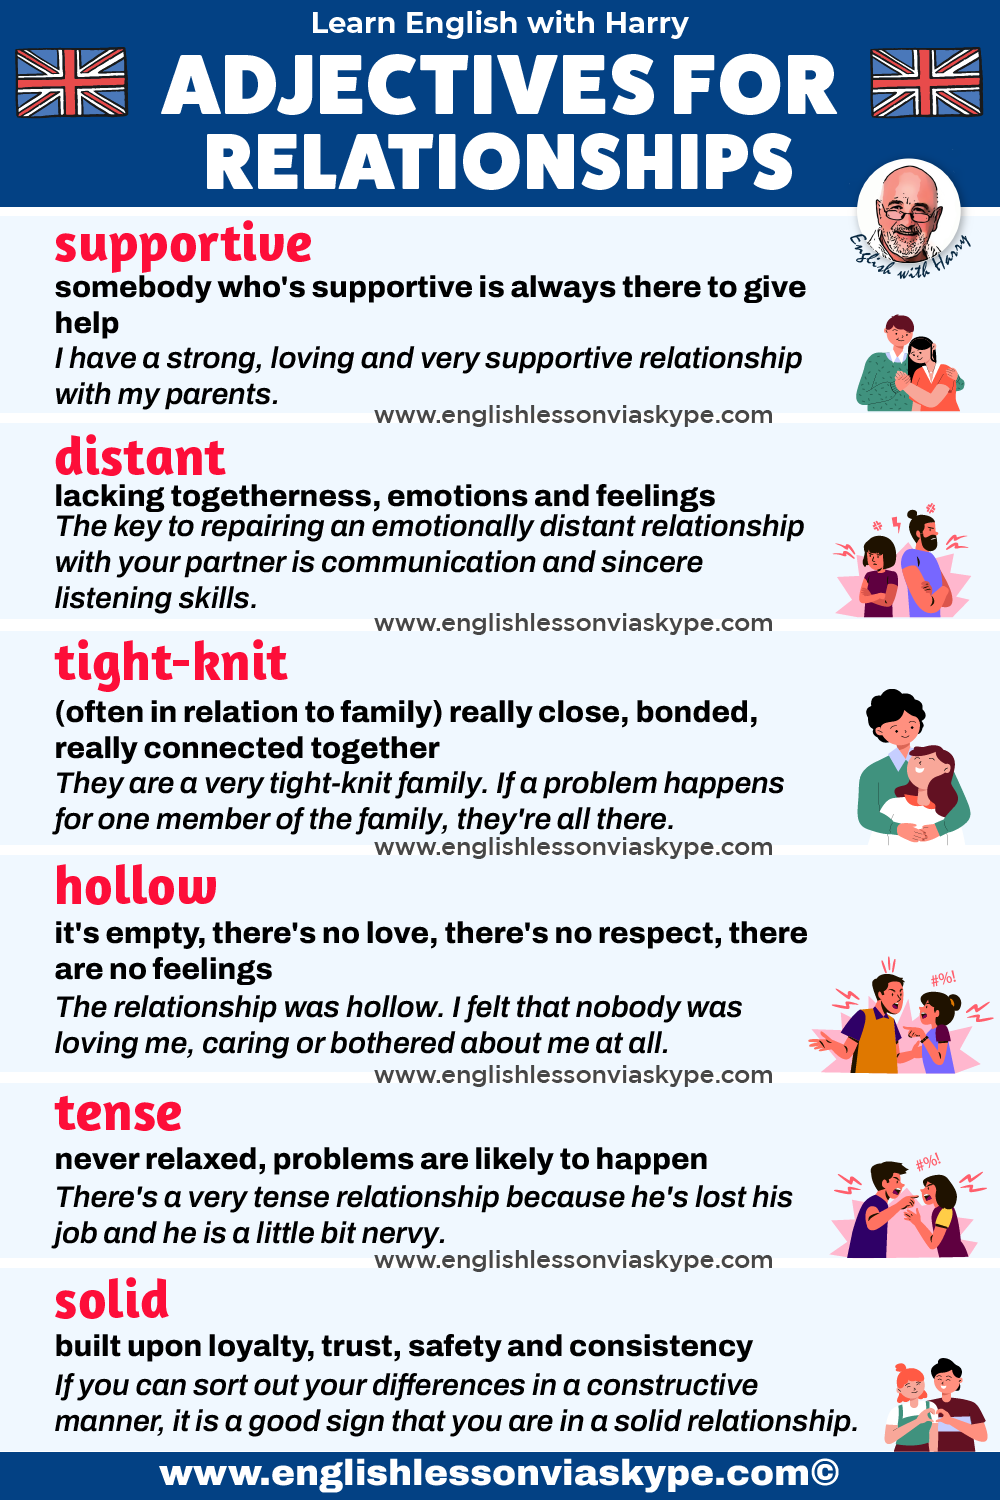 14 English adjectives for relationships. Describe relationships in English. Learn English vocabulary. Online Englsih lessons on Zoom and Skype englishlessonviaskype.com